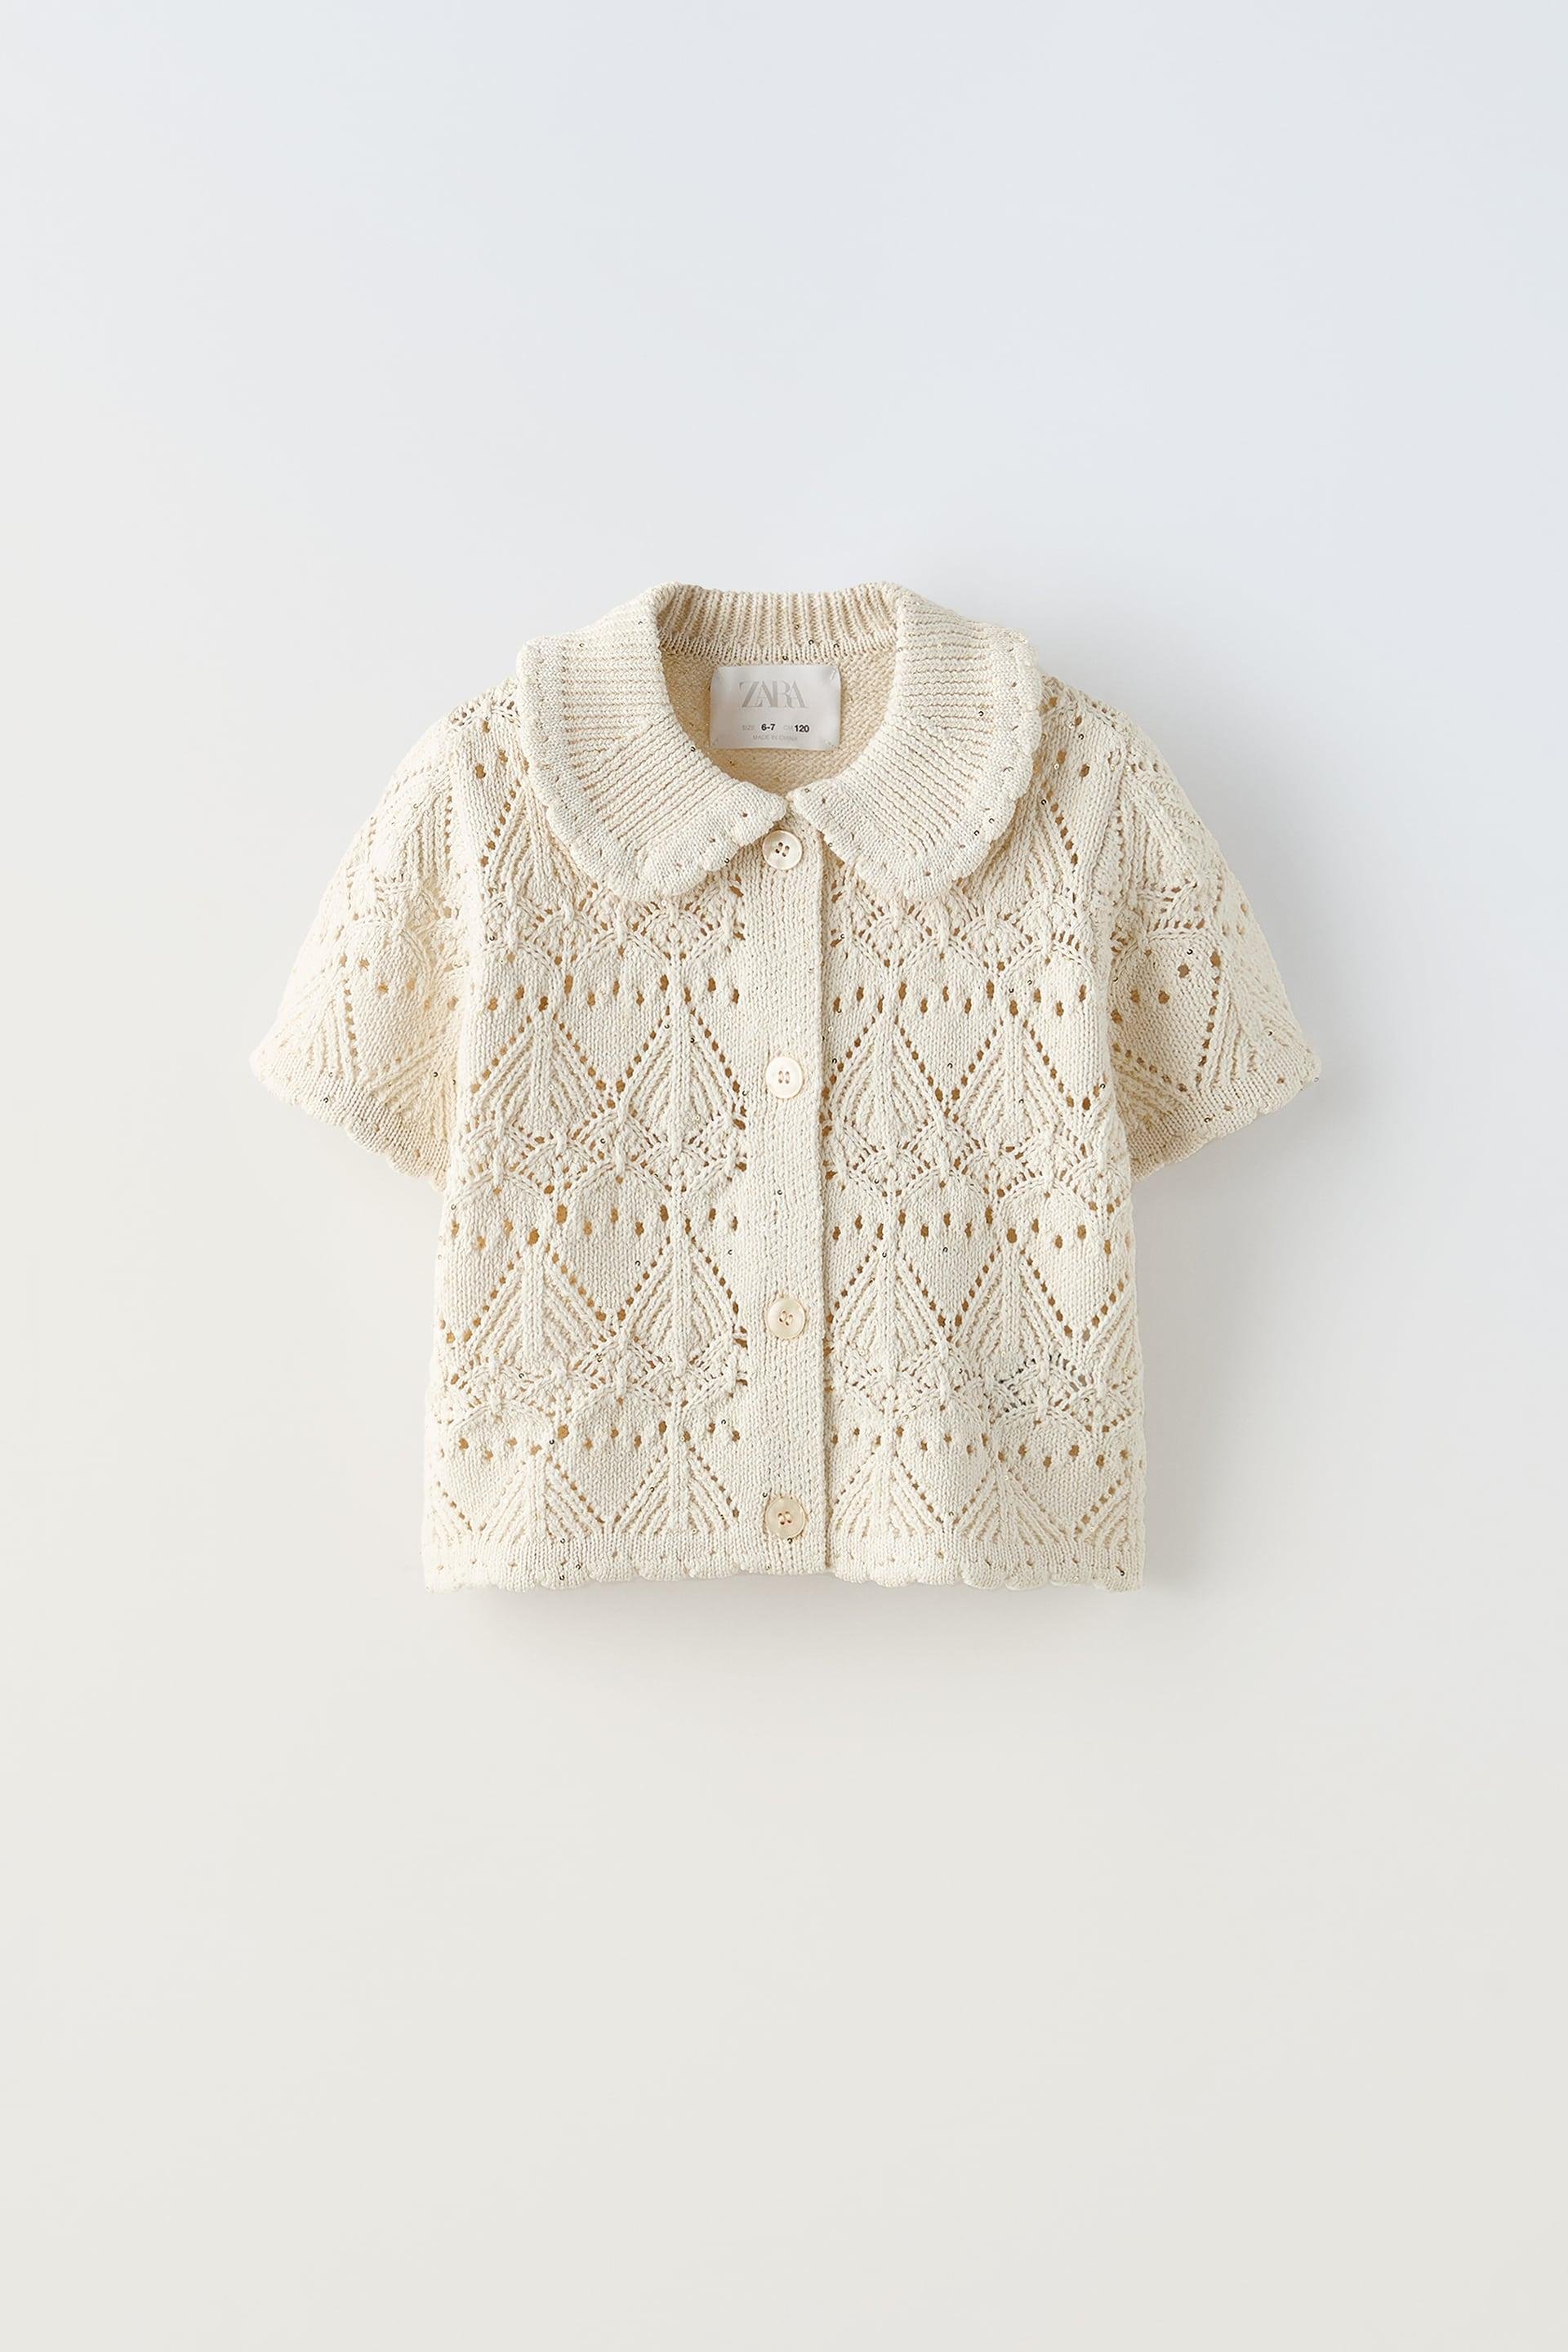 KNIT CARDIGAN WITH SEQUINS by ZARA